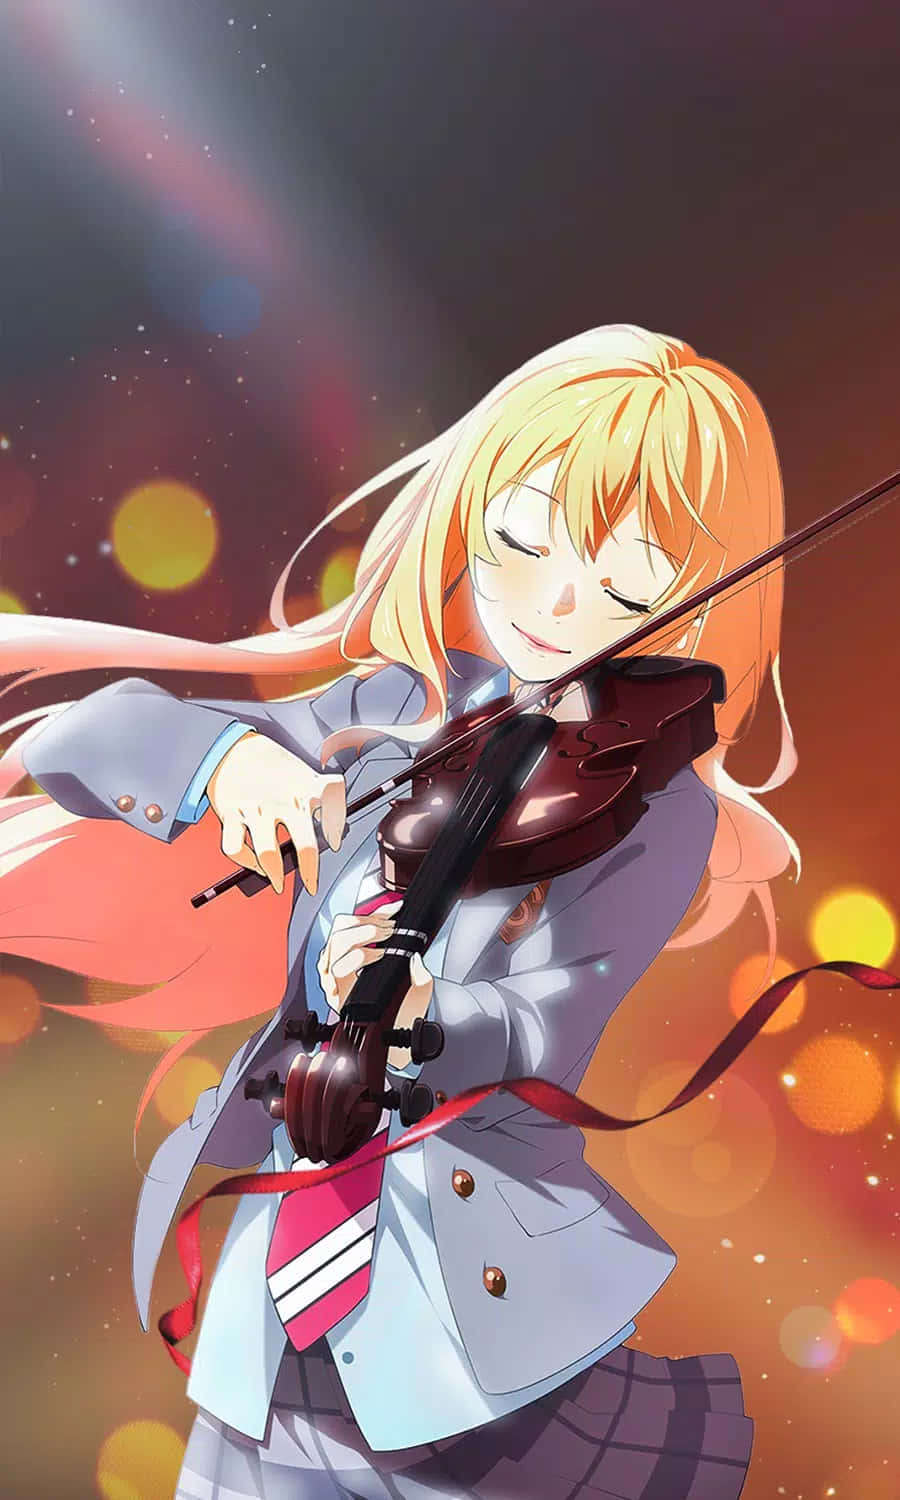 Playing The Violin For Girls Background